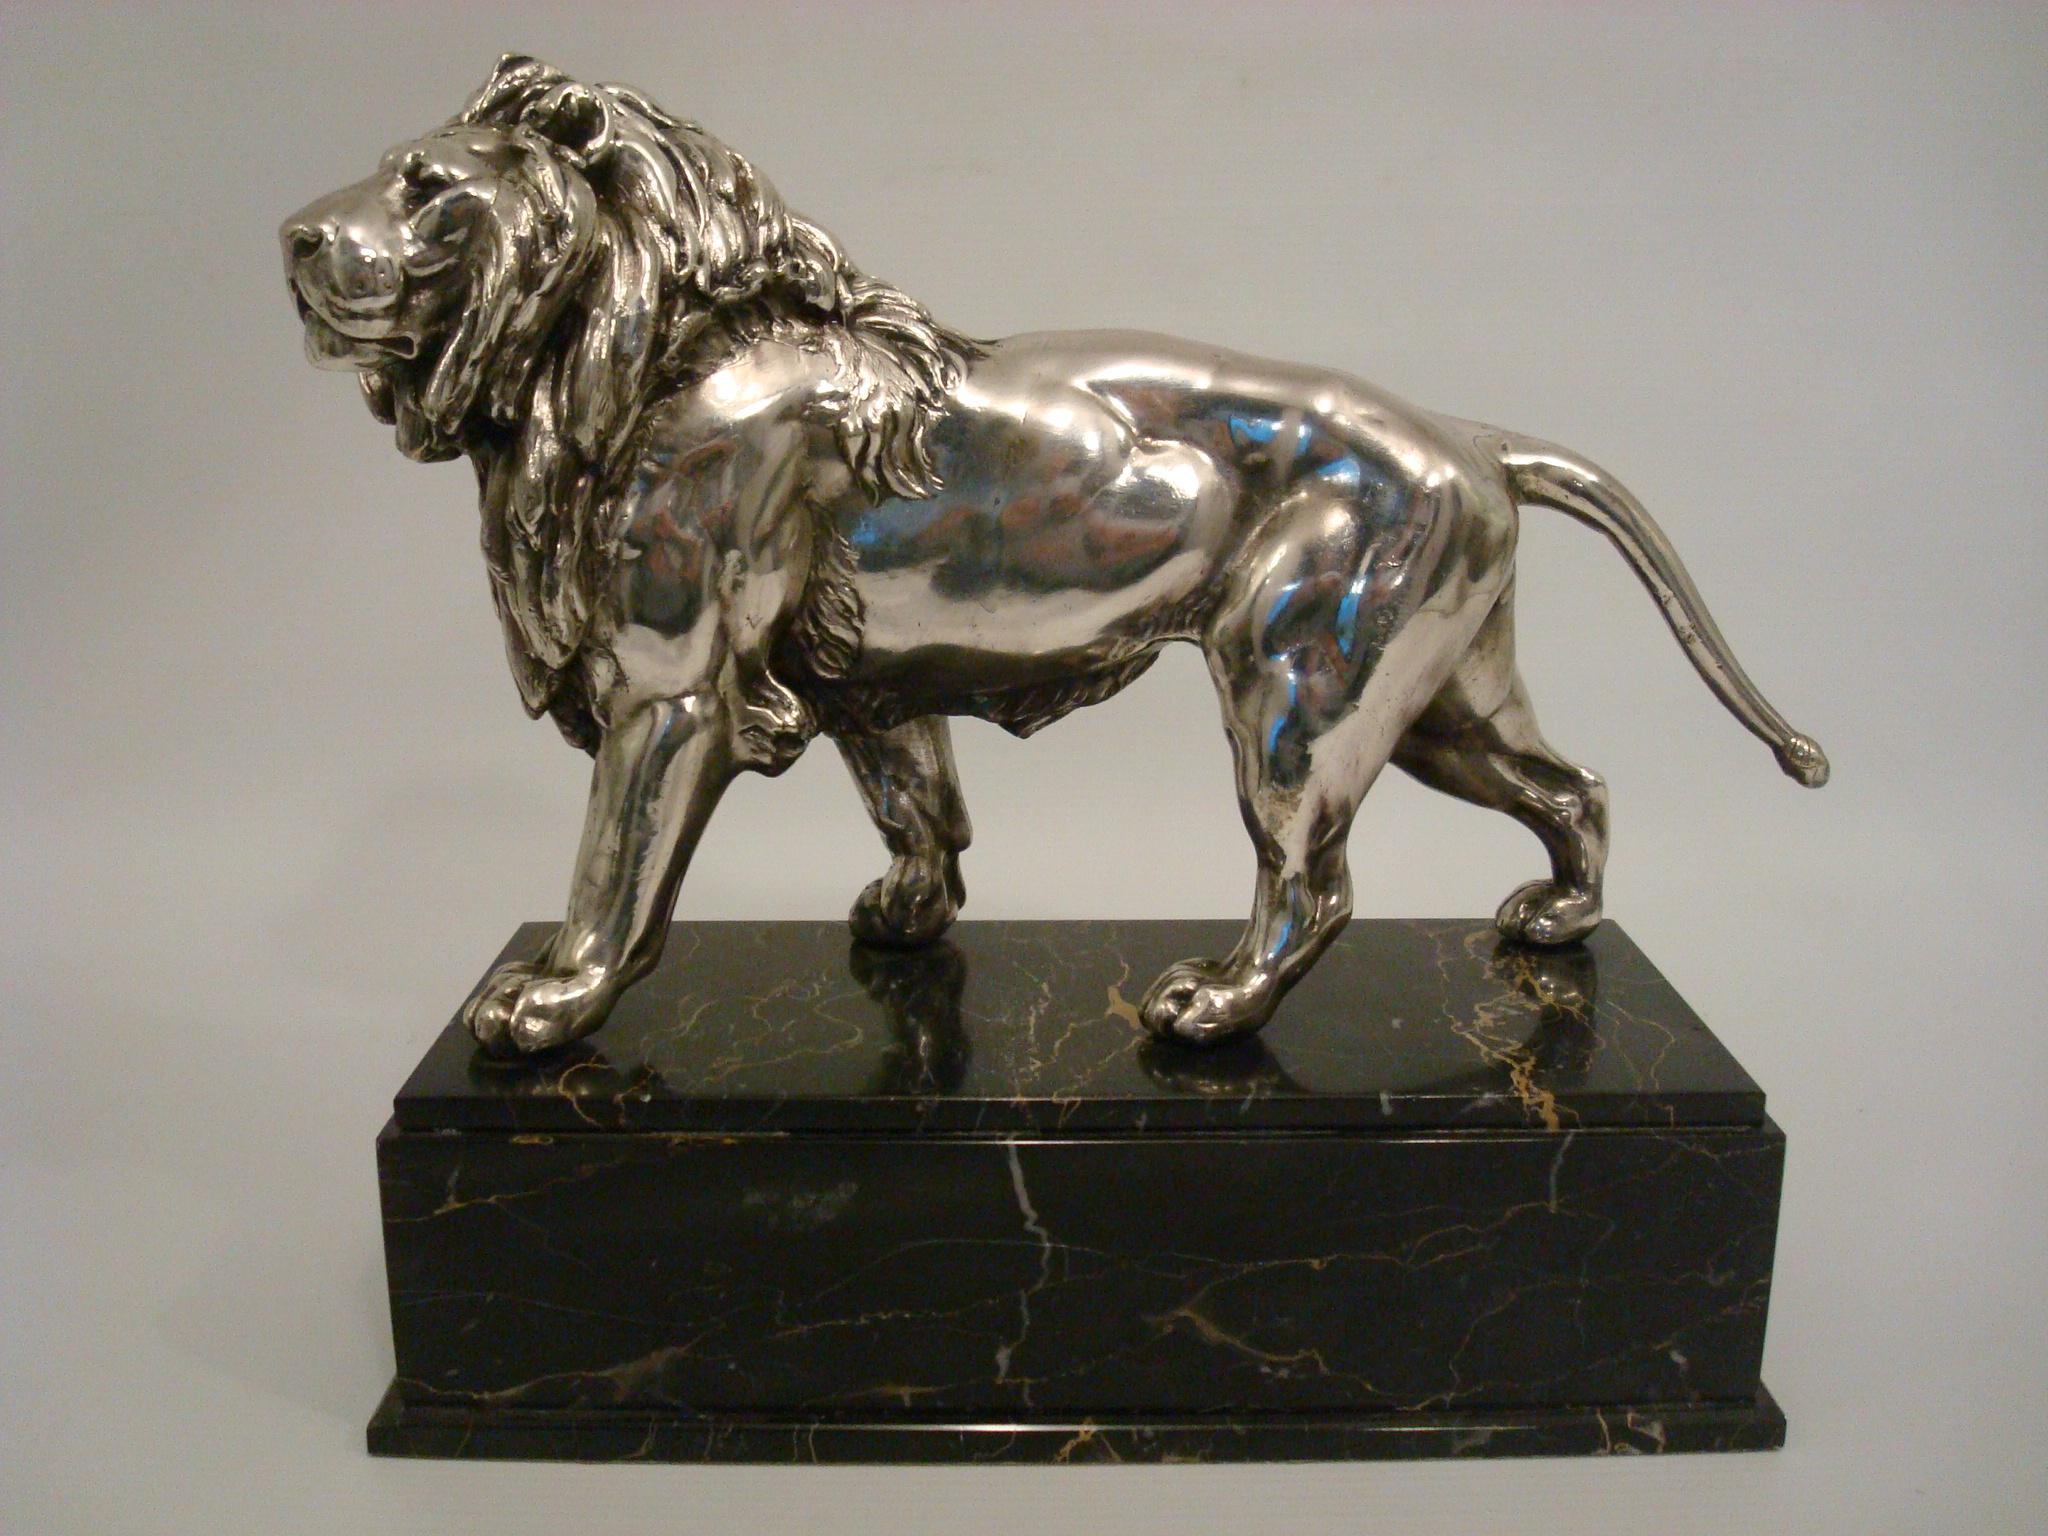 An early 20th century Silverplated Lion. This particular example very well modelled. Mounted over a Portoro Italian marble base. Perfect size to decorate a desk. France, circa 1900.

